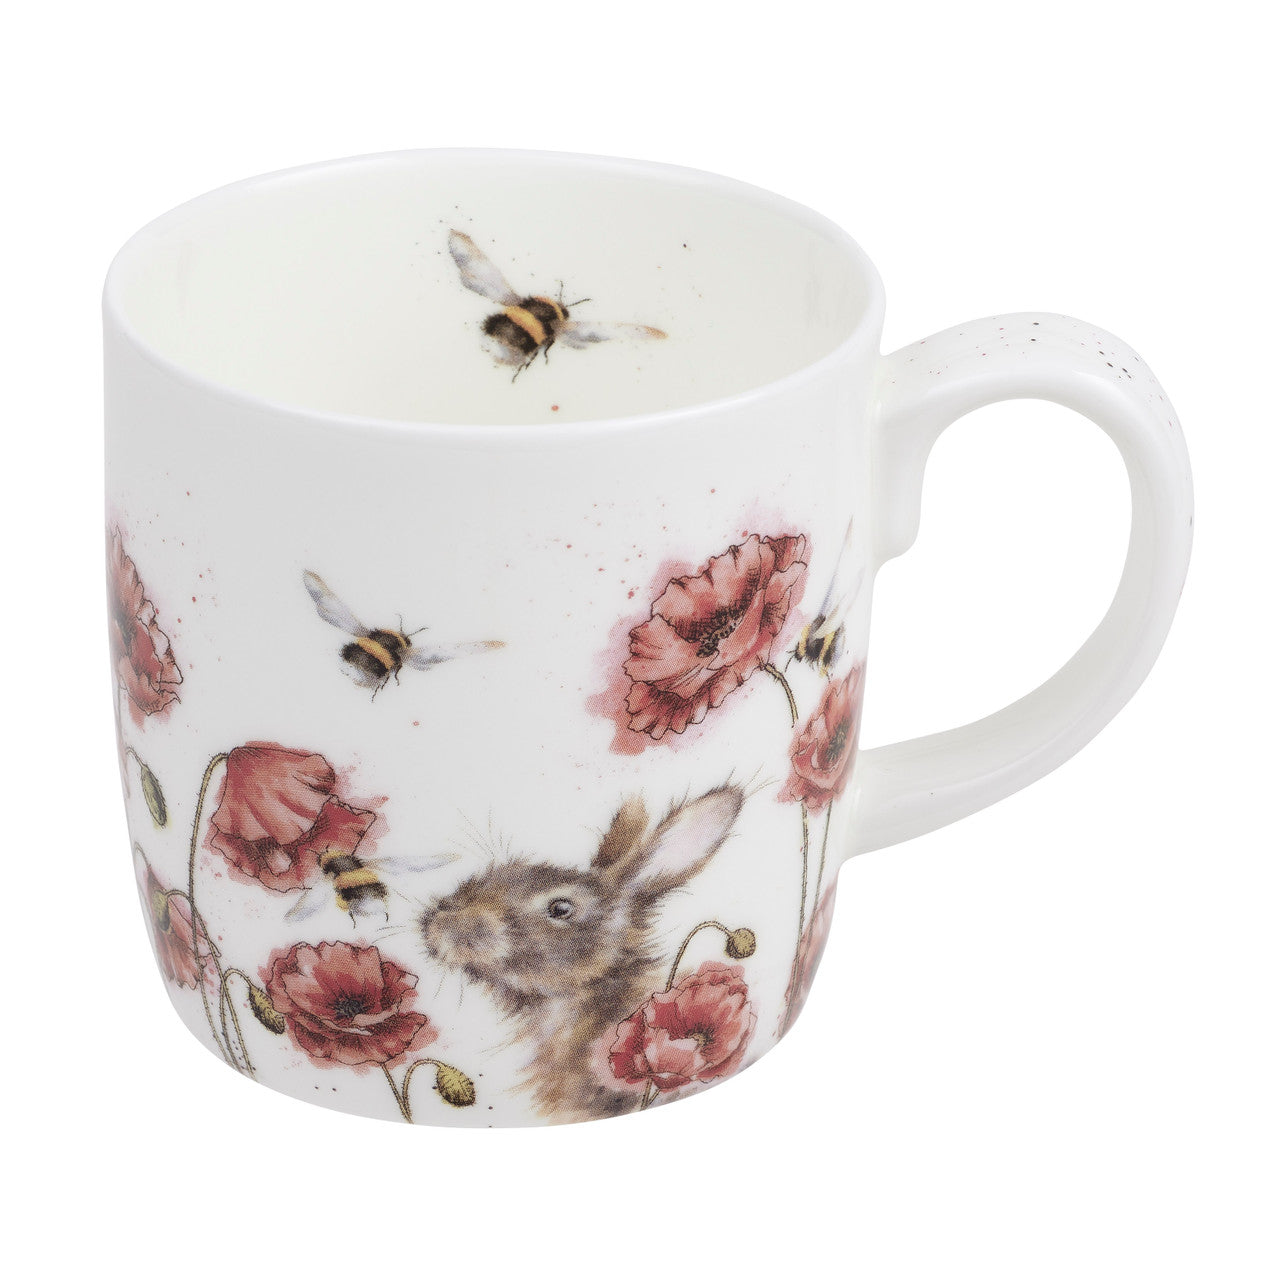 'Let it Bee' Bone China Mug from Wrendale Designs by Royal Worcester.